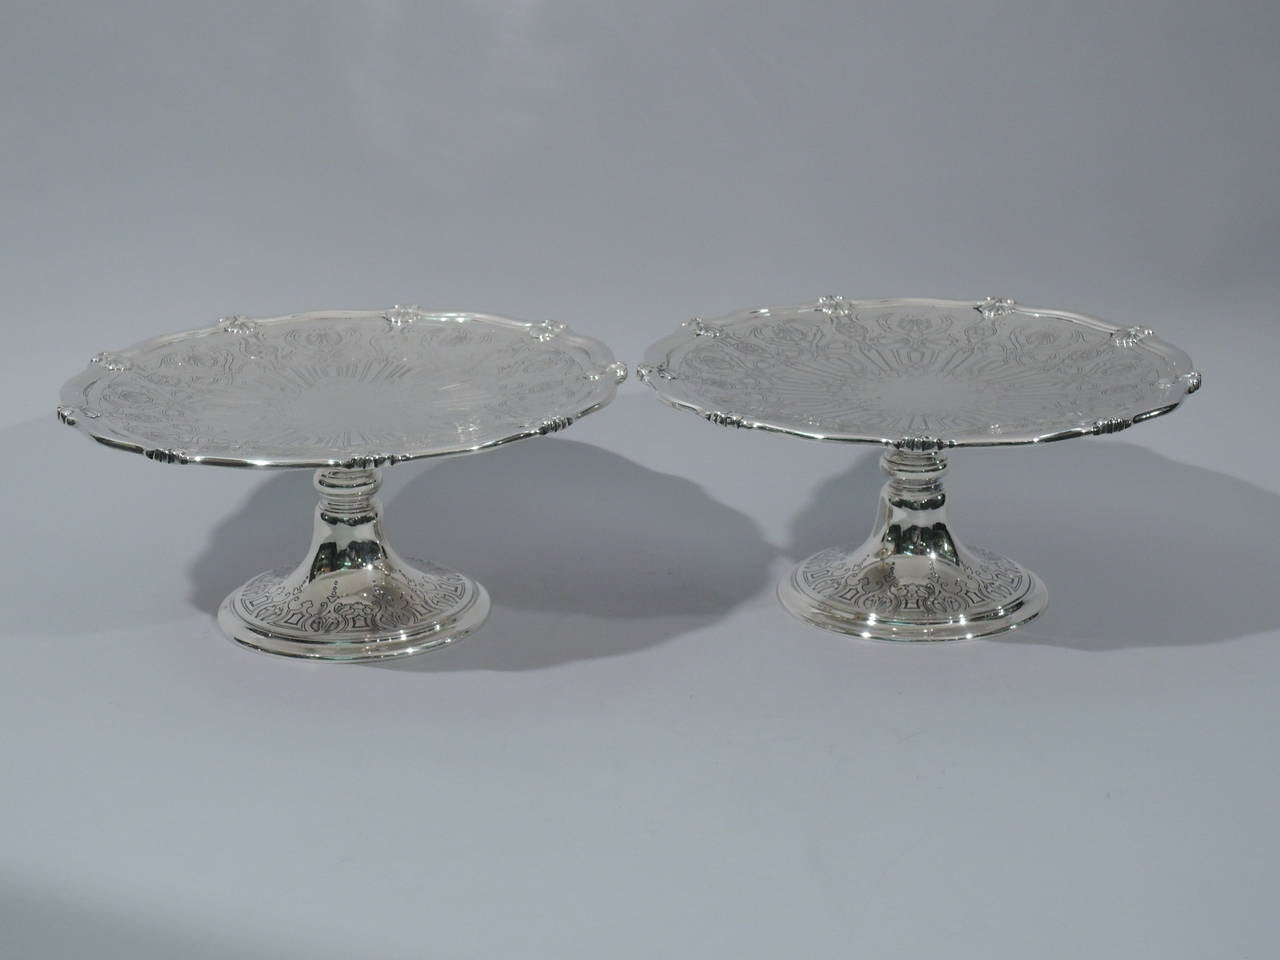 Pair of sterling silver compotes. Made by Tiffany & Co. in New York, circa 1915. Each: shallow bowl with plain centre (vacant) radiating acid-etched curvilinear ornament. Rim is scrolled with chased scallop shells. Raised and knopped support with